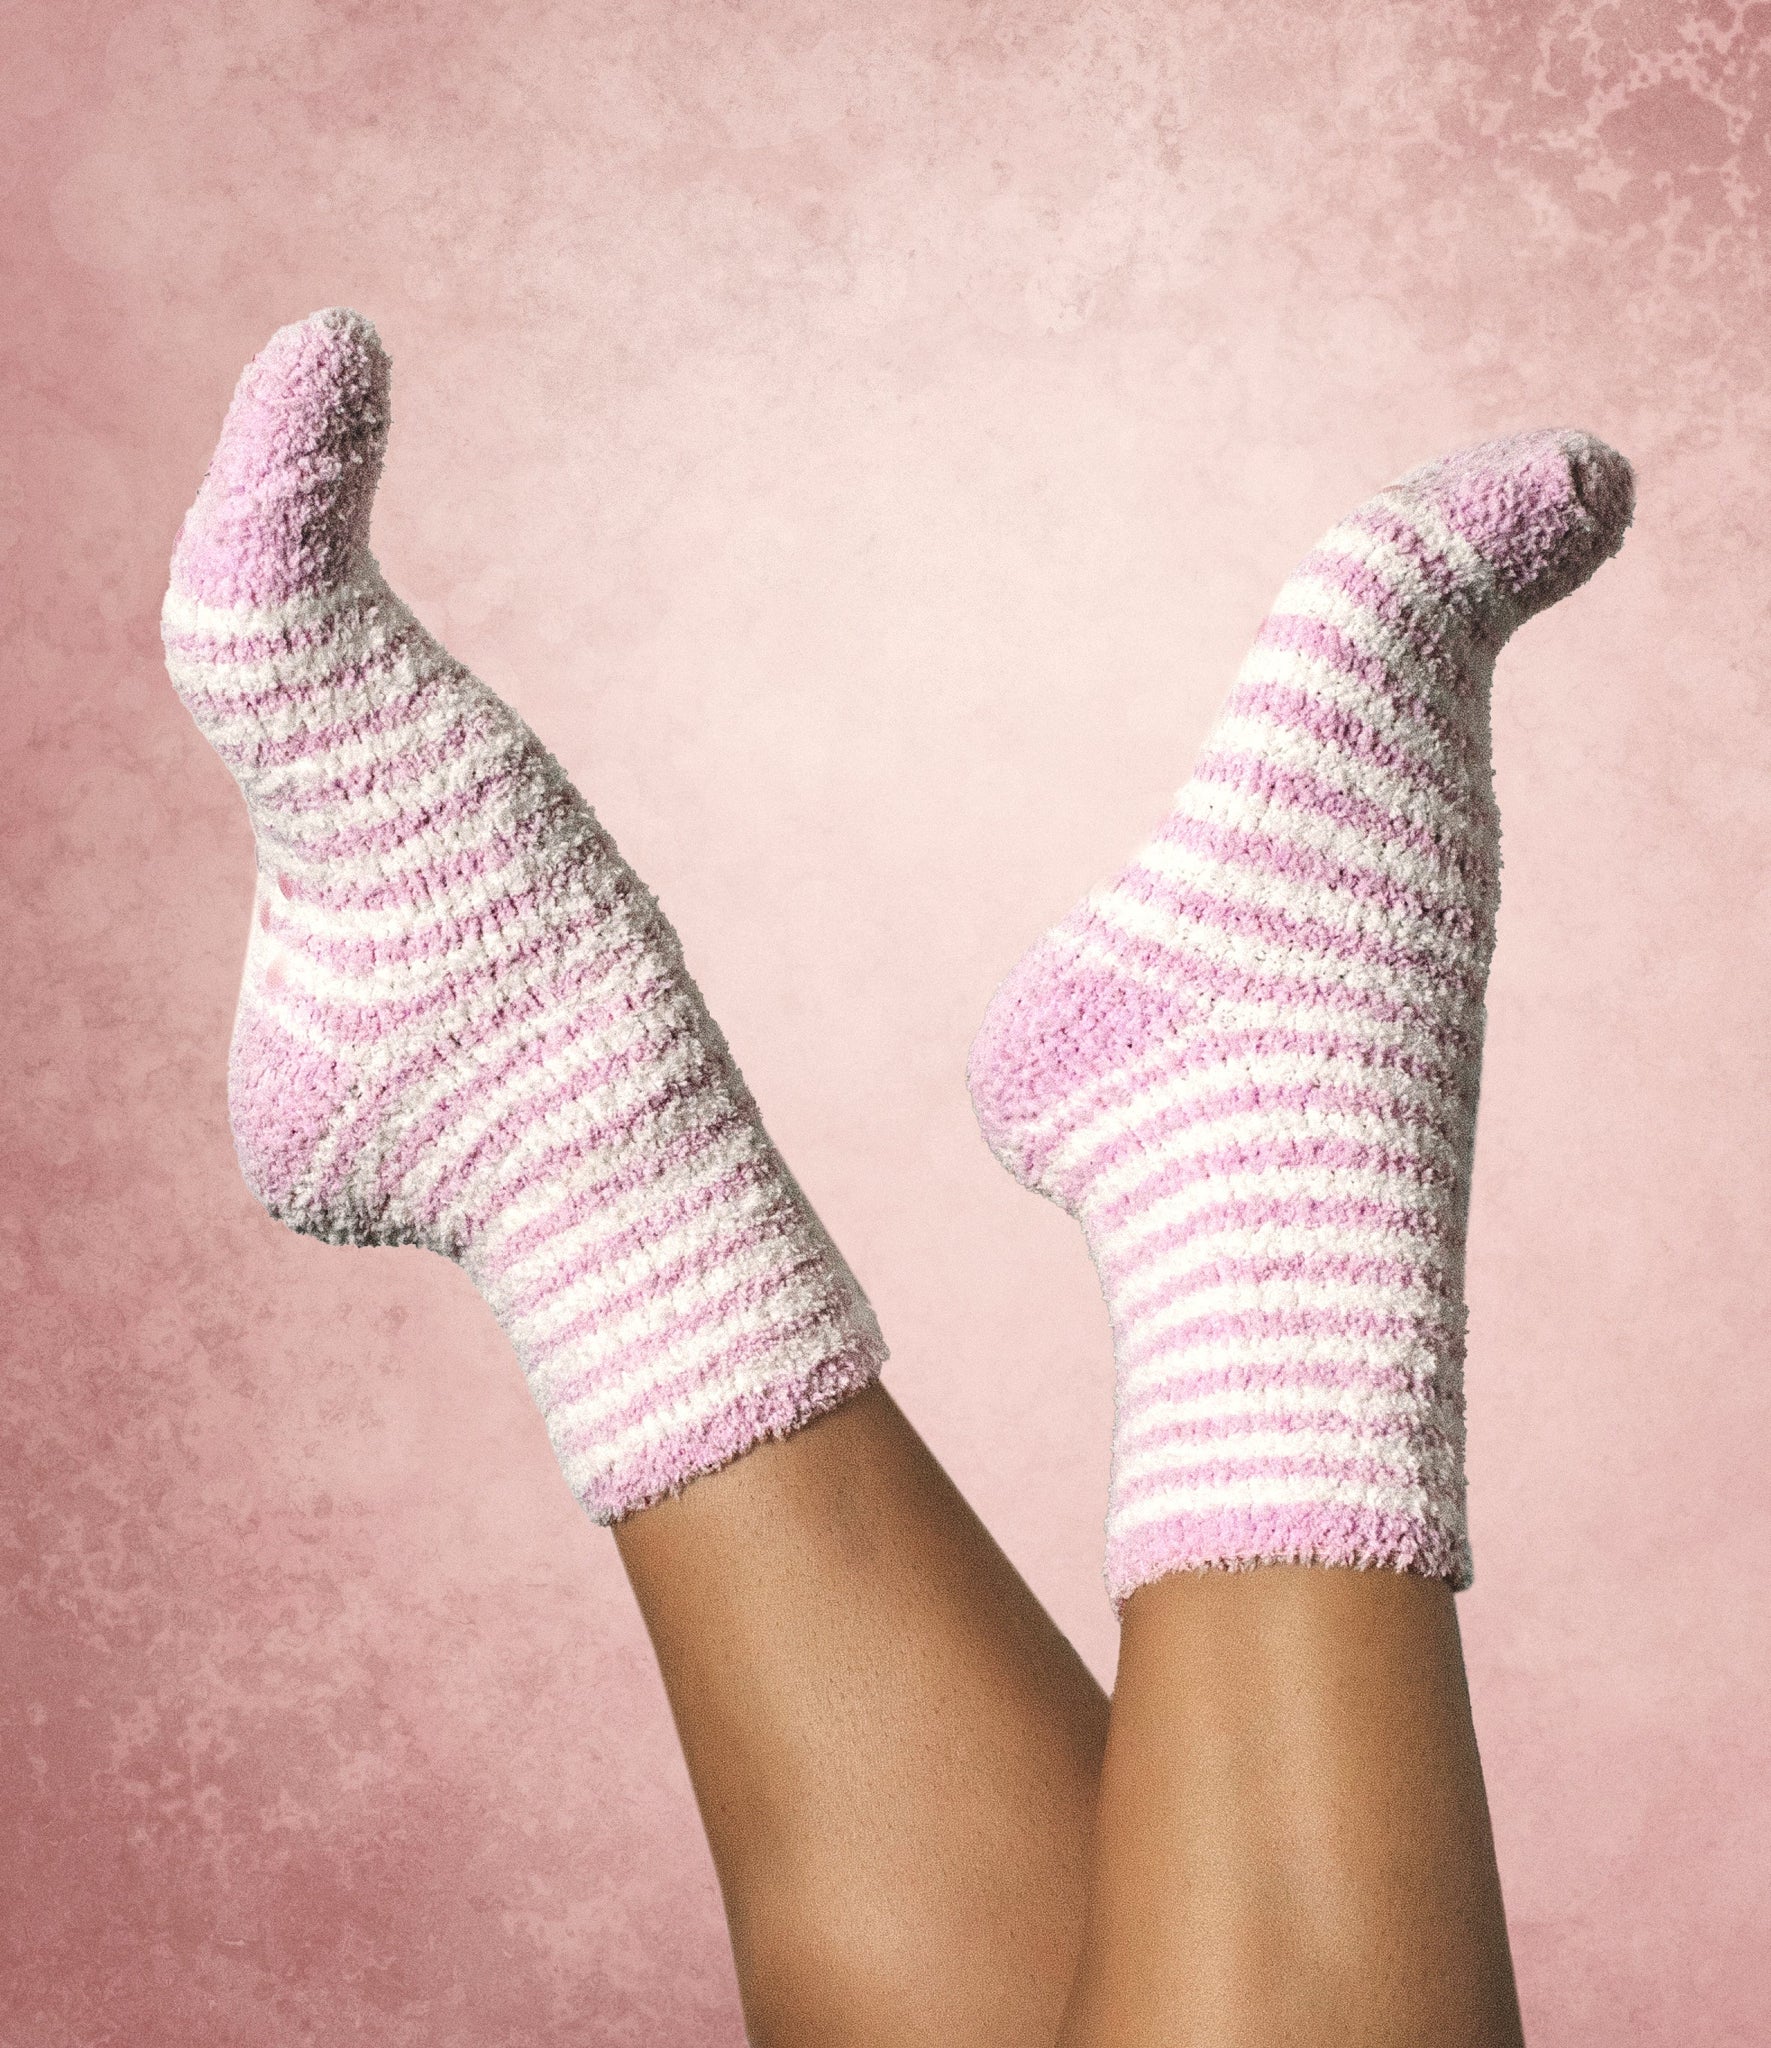 3 Pairs Warm Cozy Slipper Socks With Cinnamon & Shea Butter Infused